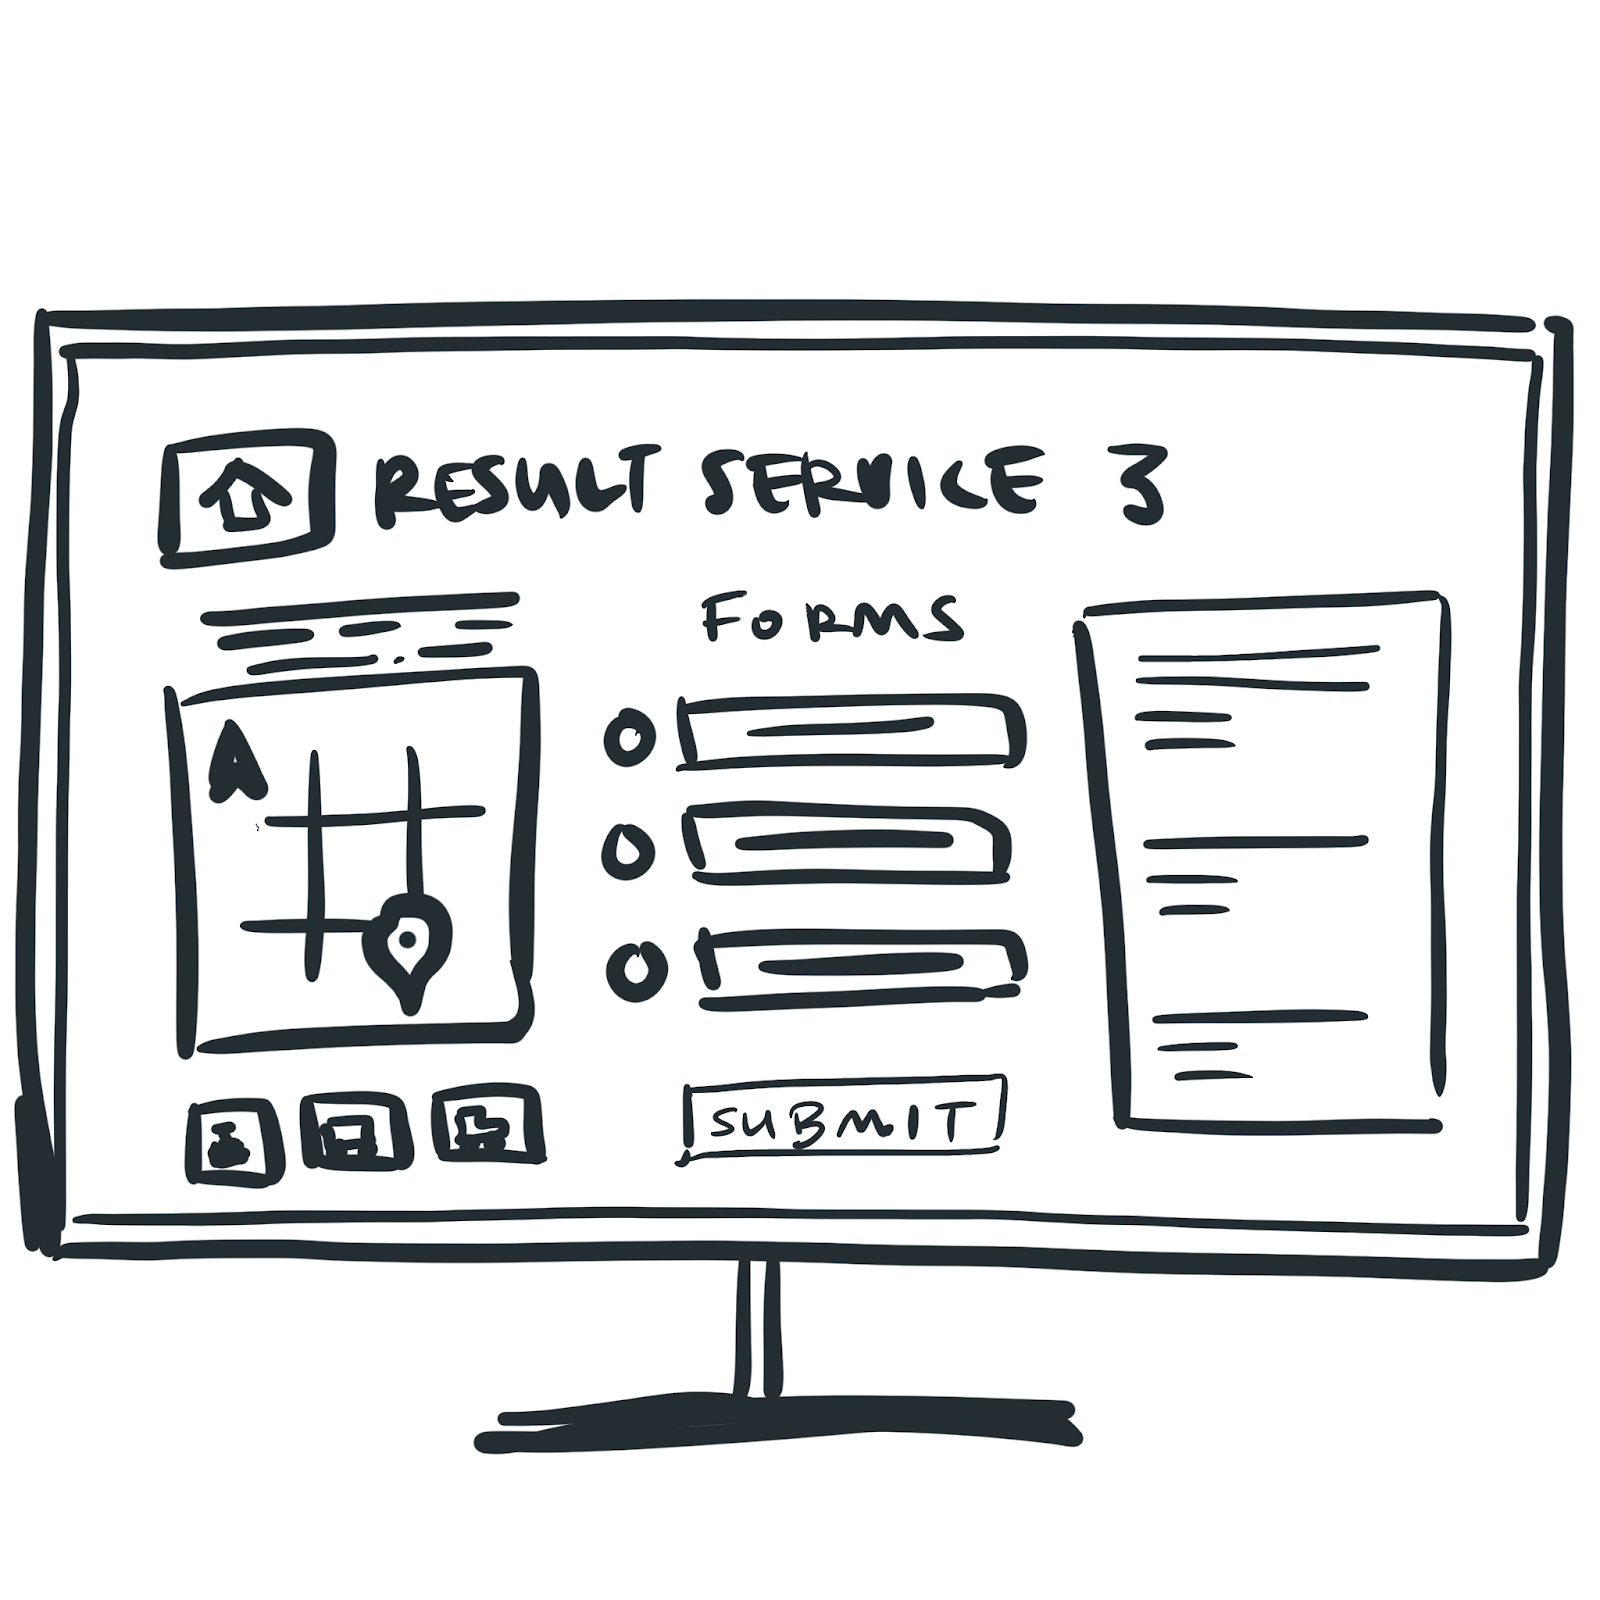 Initial sketch of how Personalized Service app should work